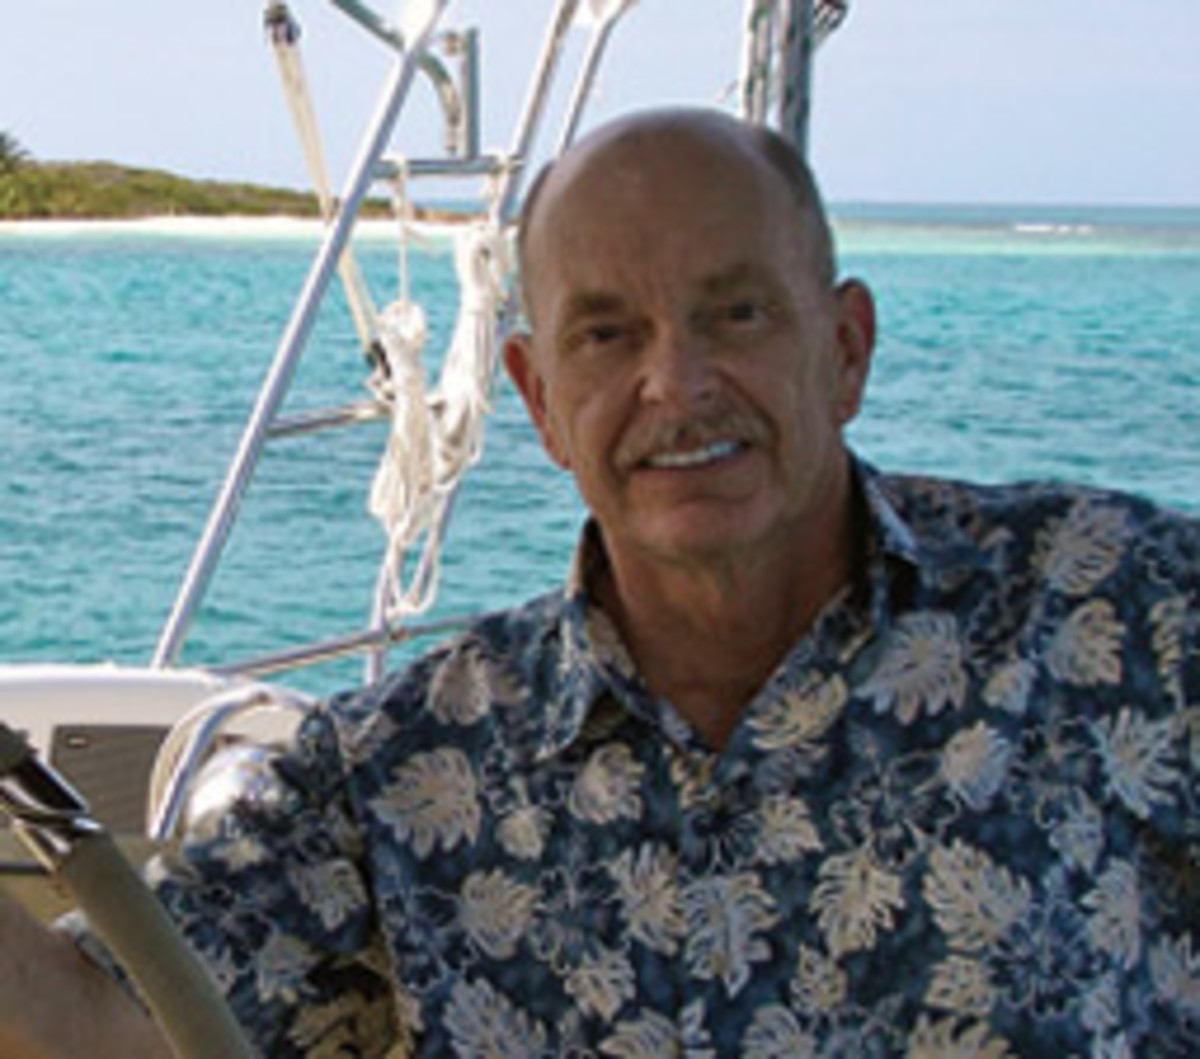 Ken Appleton is president of the Chesapeake Area Captains Association (CAPCA) and a retired Coast Guard captain who spent 26 years on active duty.